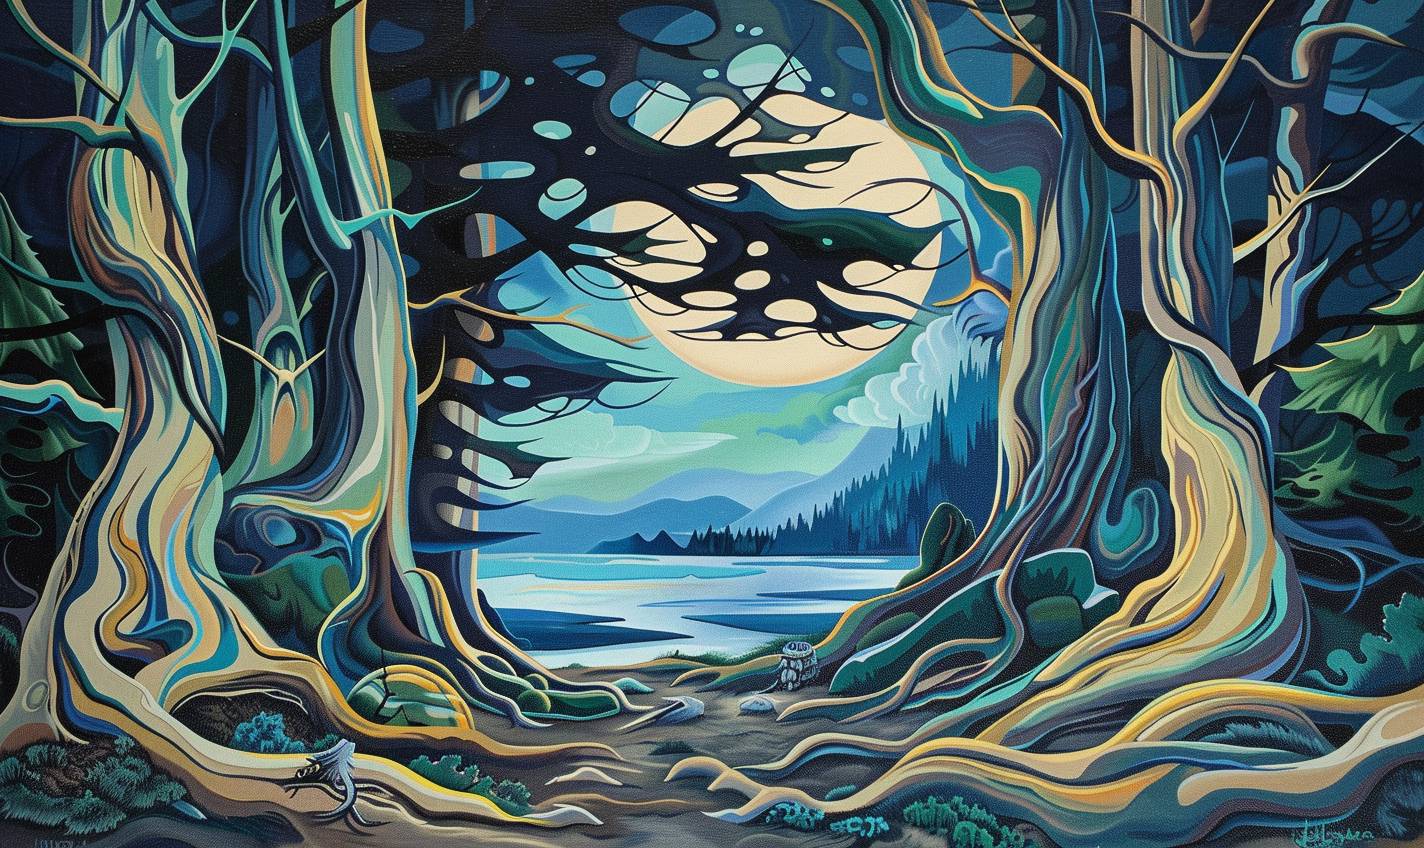 In the style of Lawren Harris, an ancient forest filled with magical creatures